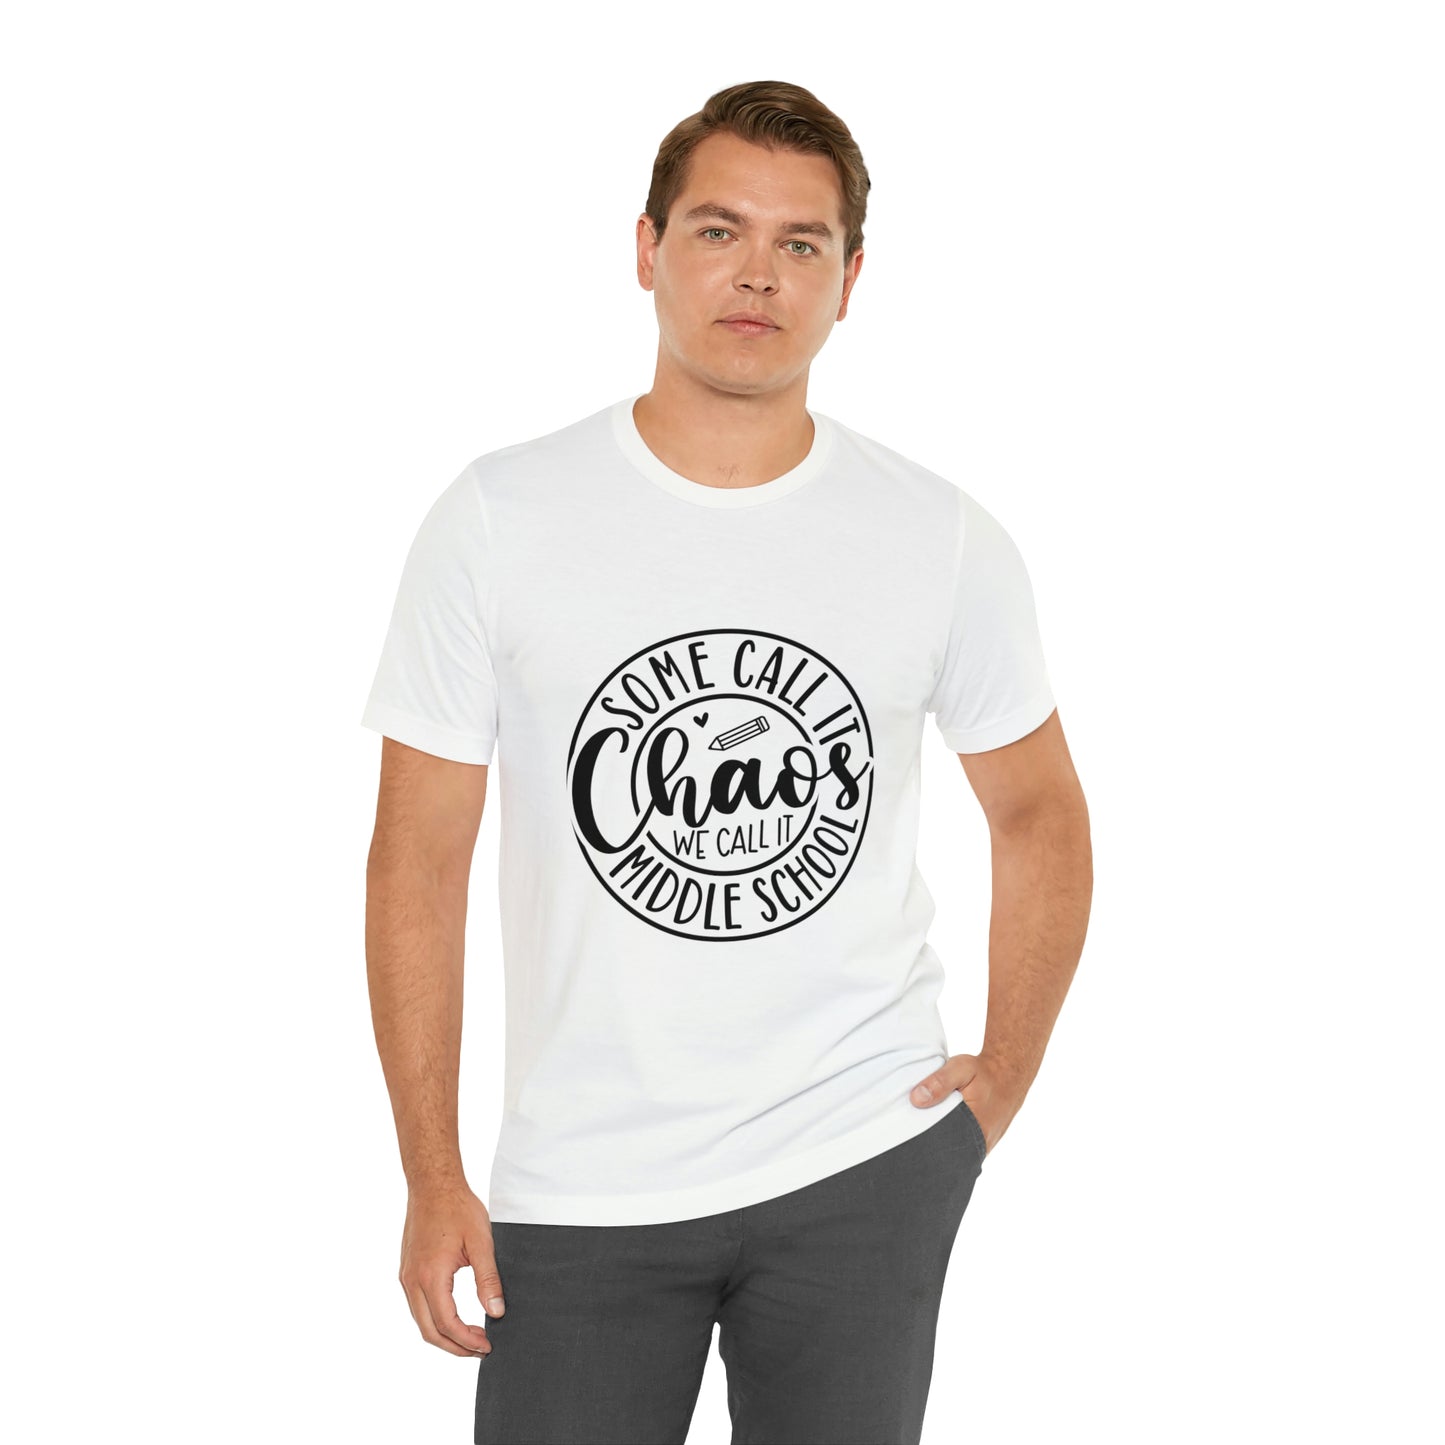 "Some call it Chaos, We call it middle school " Unisex Jersey Short Sleeve Tee